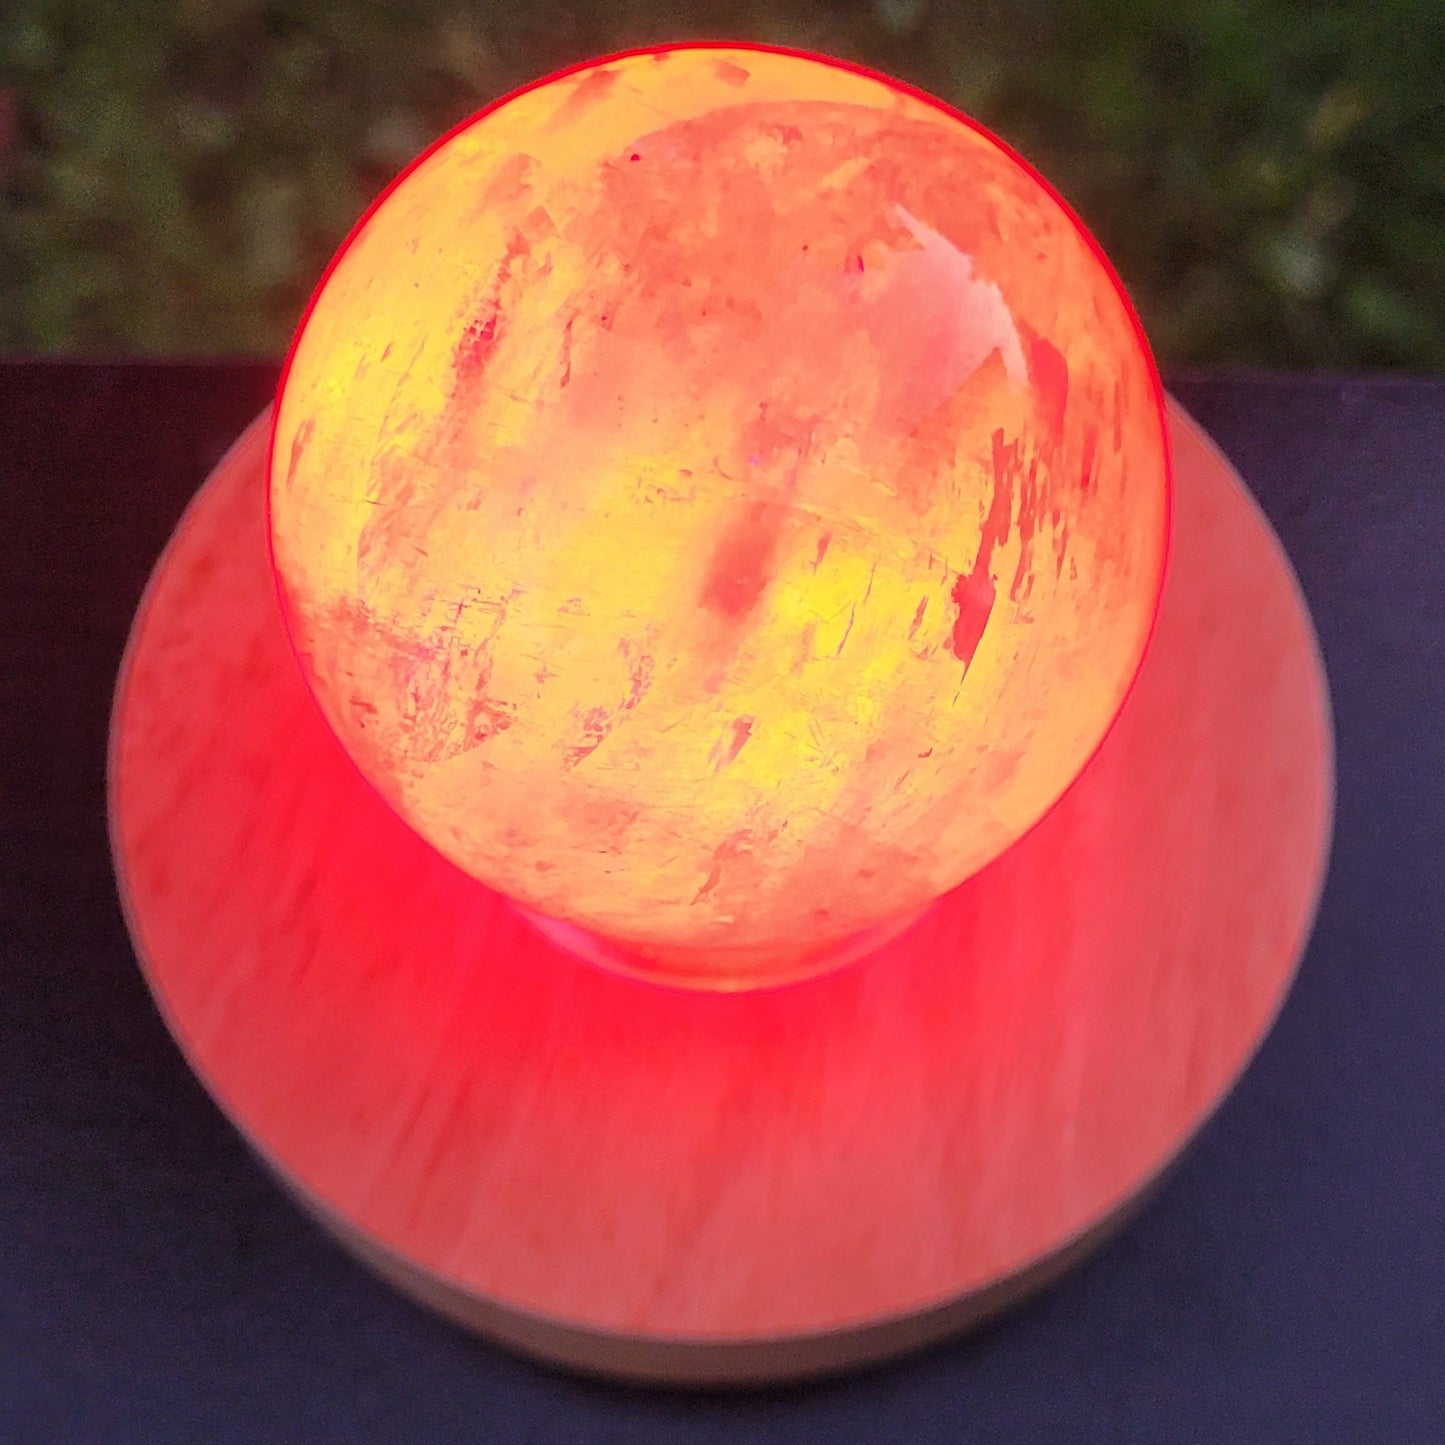 Large LED Light Sphere Display Stands (Color Changing OR White) for Crystal Balls 2.3" to 6" (60mm to 155mm)